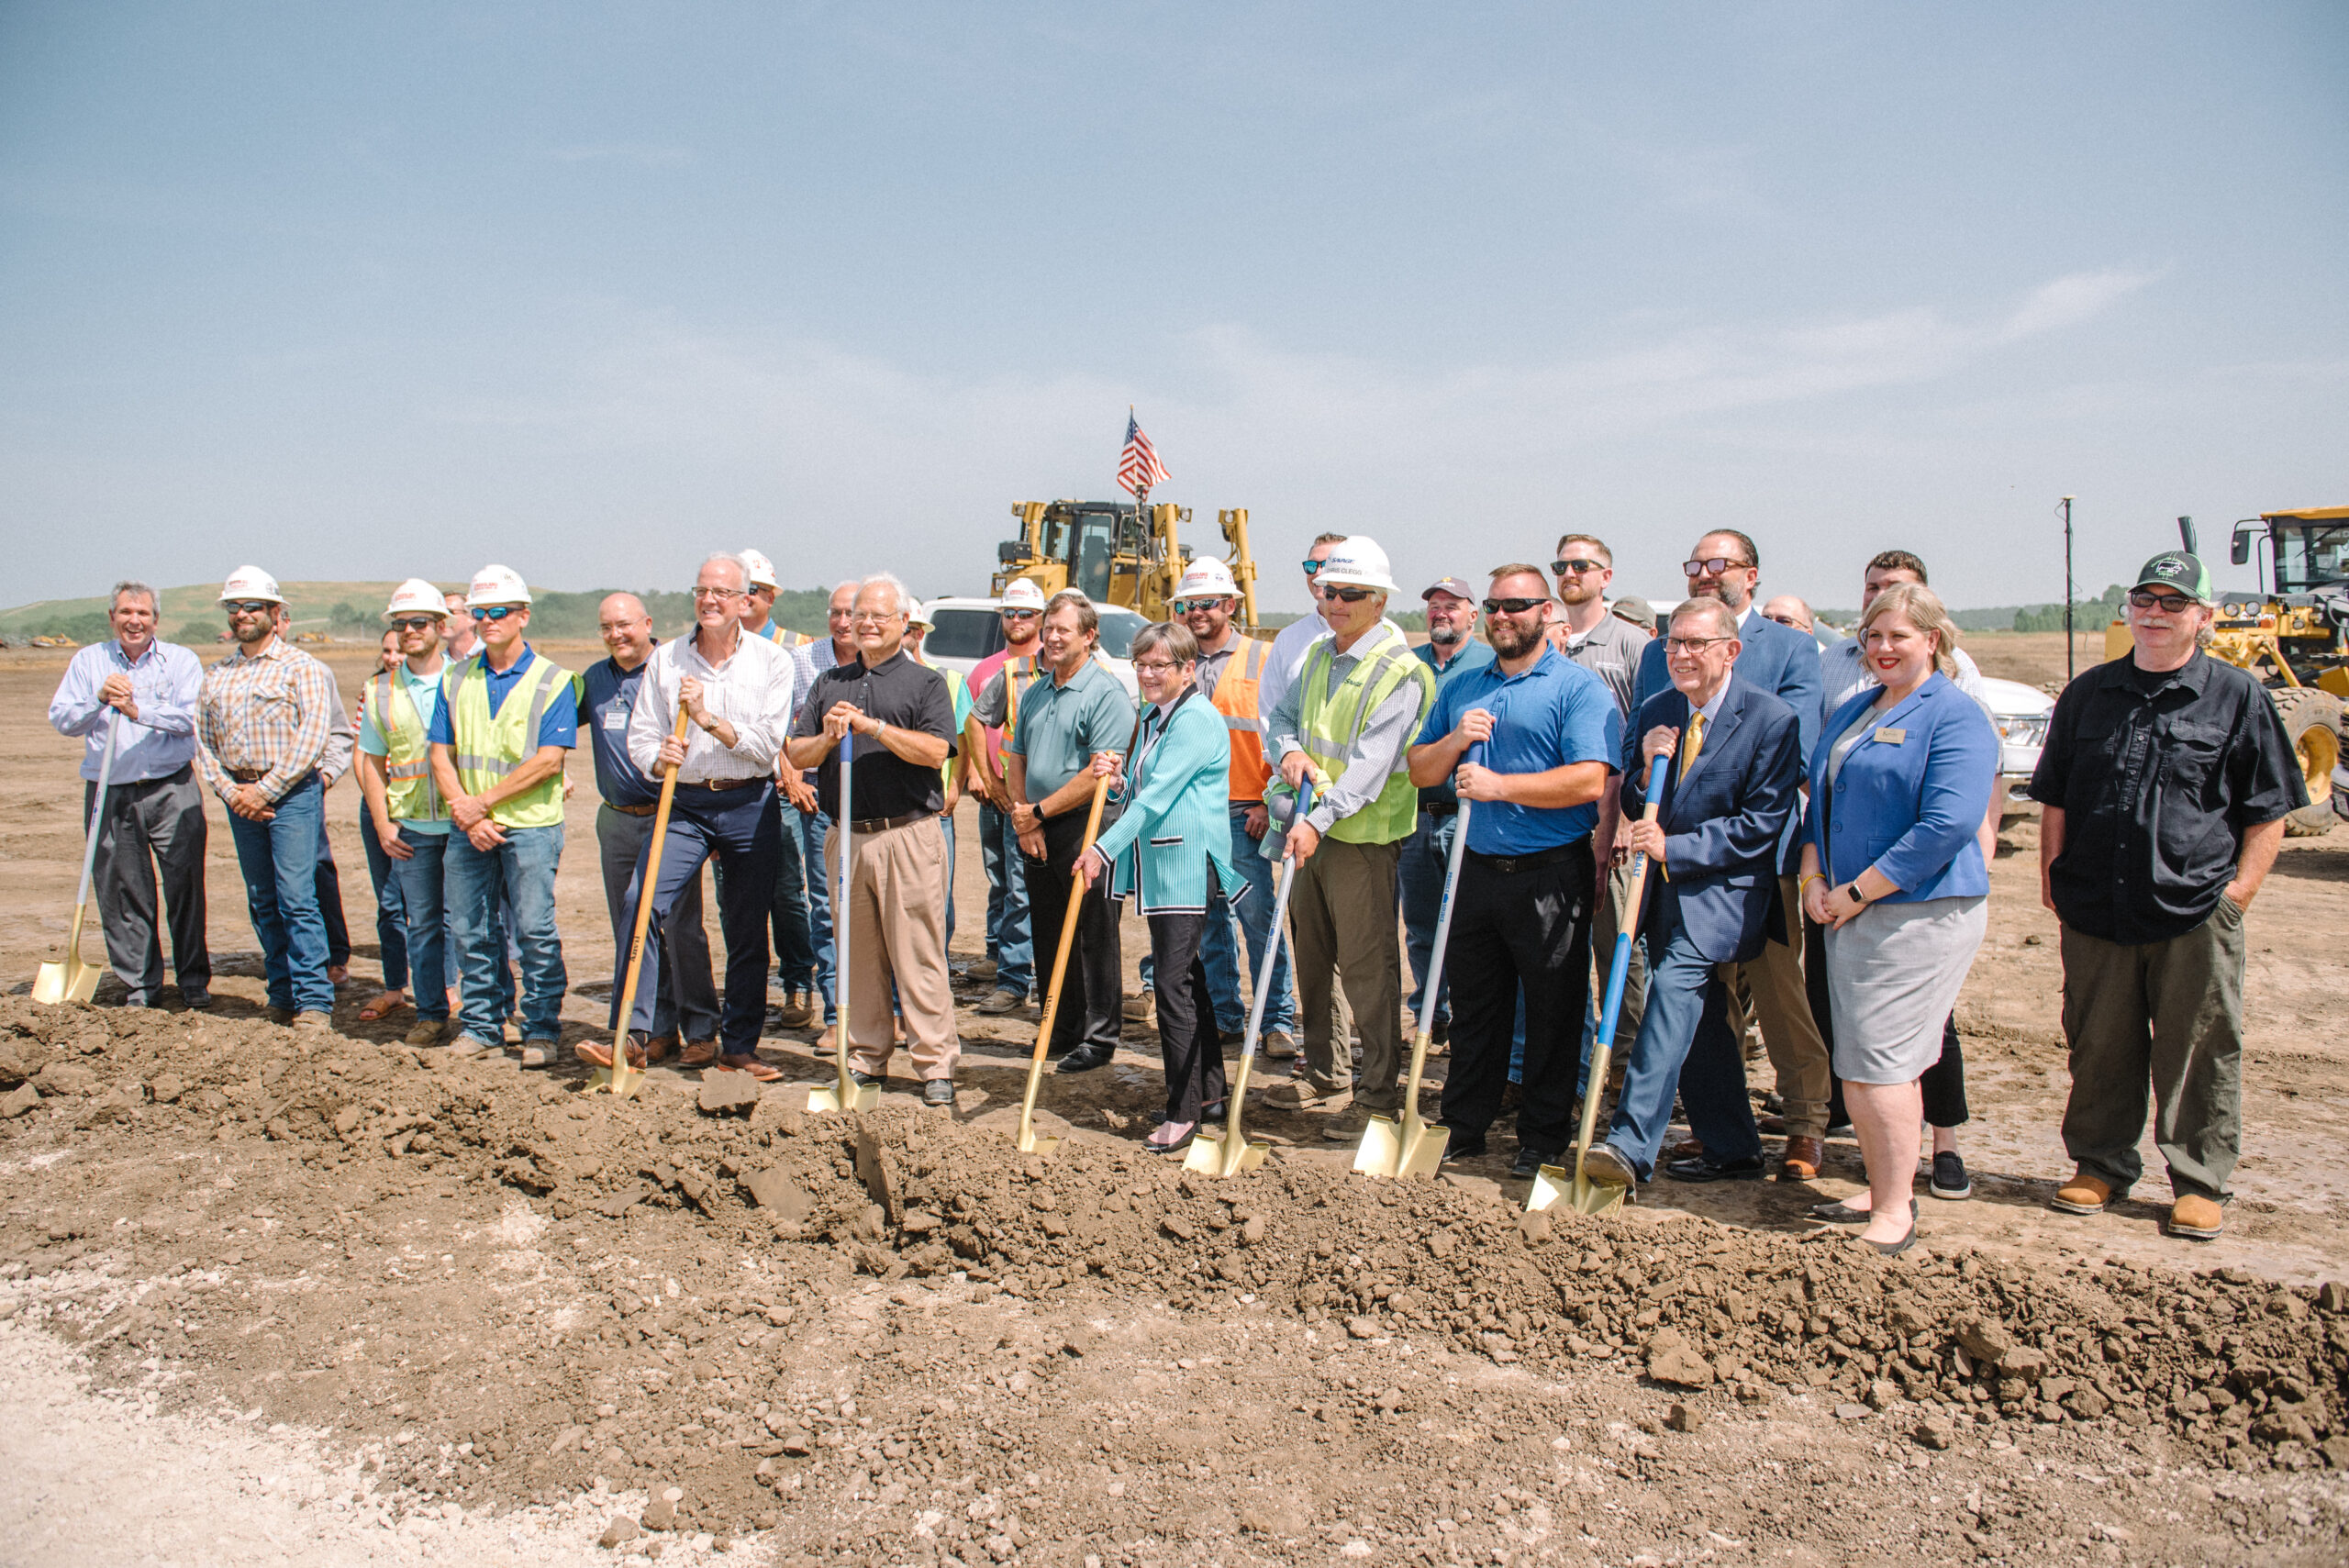 State and Local Officials Support Construction Kickoff for Bartlett’s $375 Million Soybean Crushing Plant in Southeast Kansas